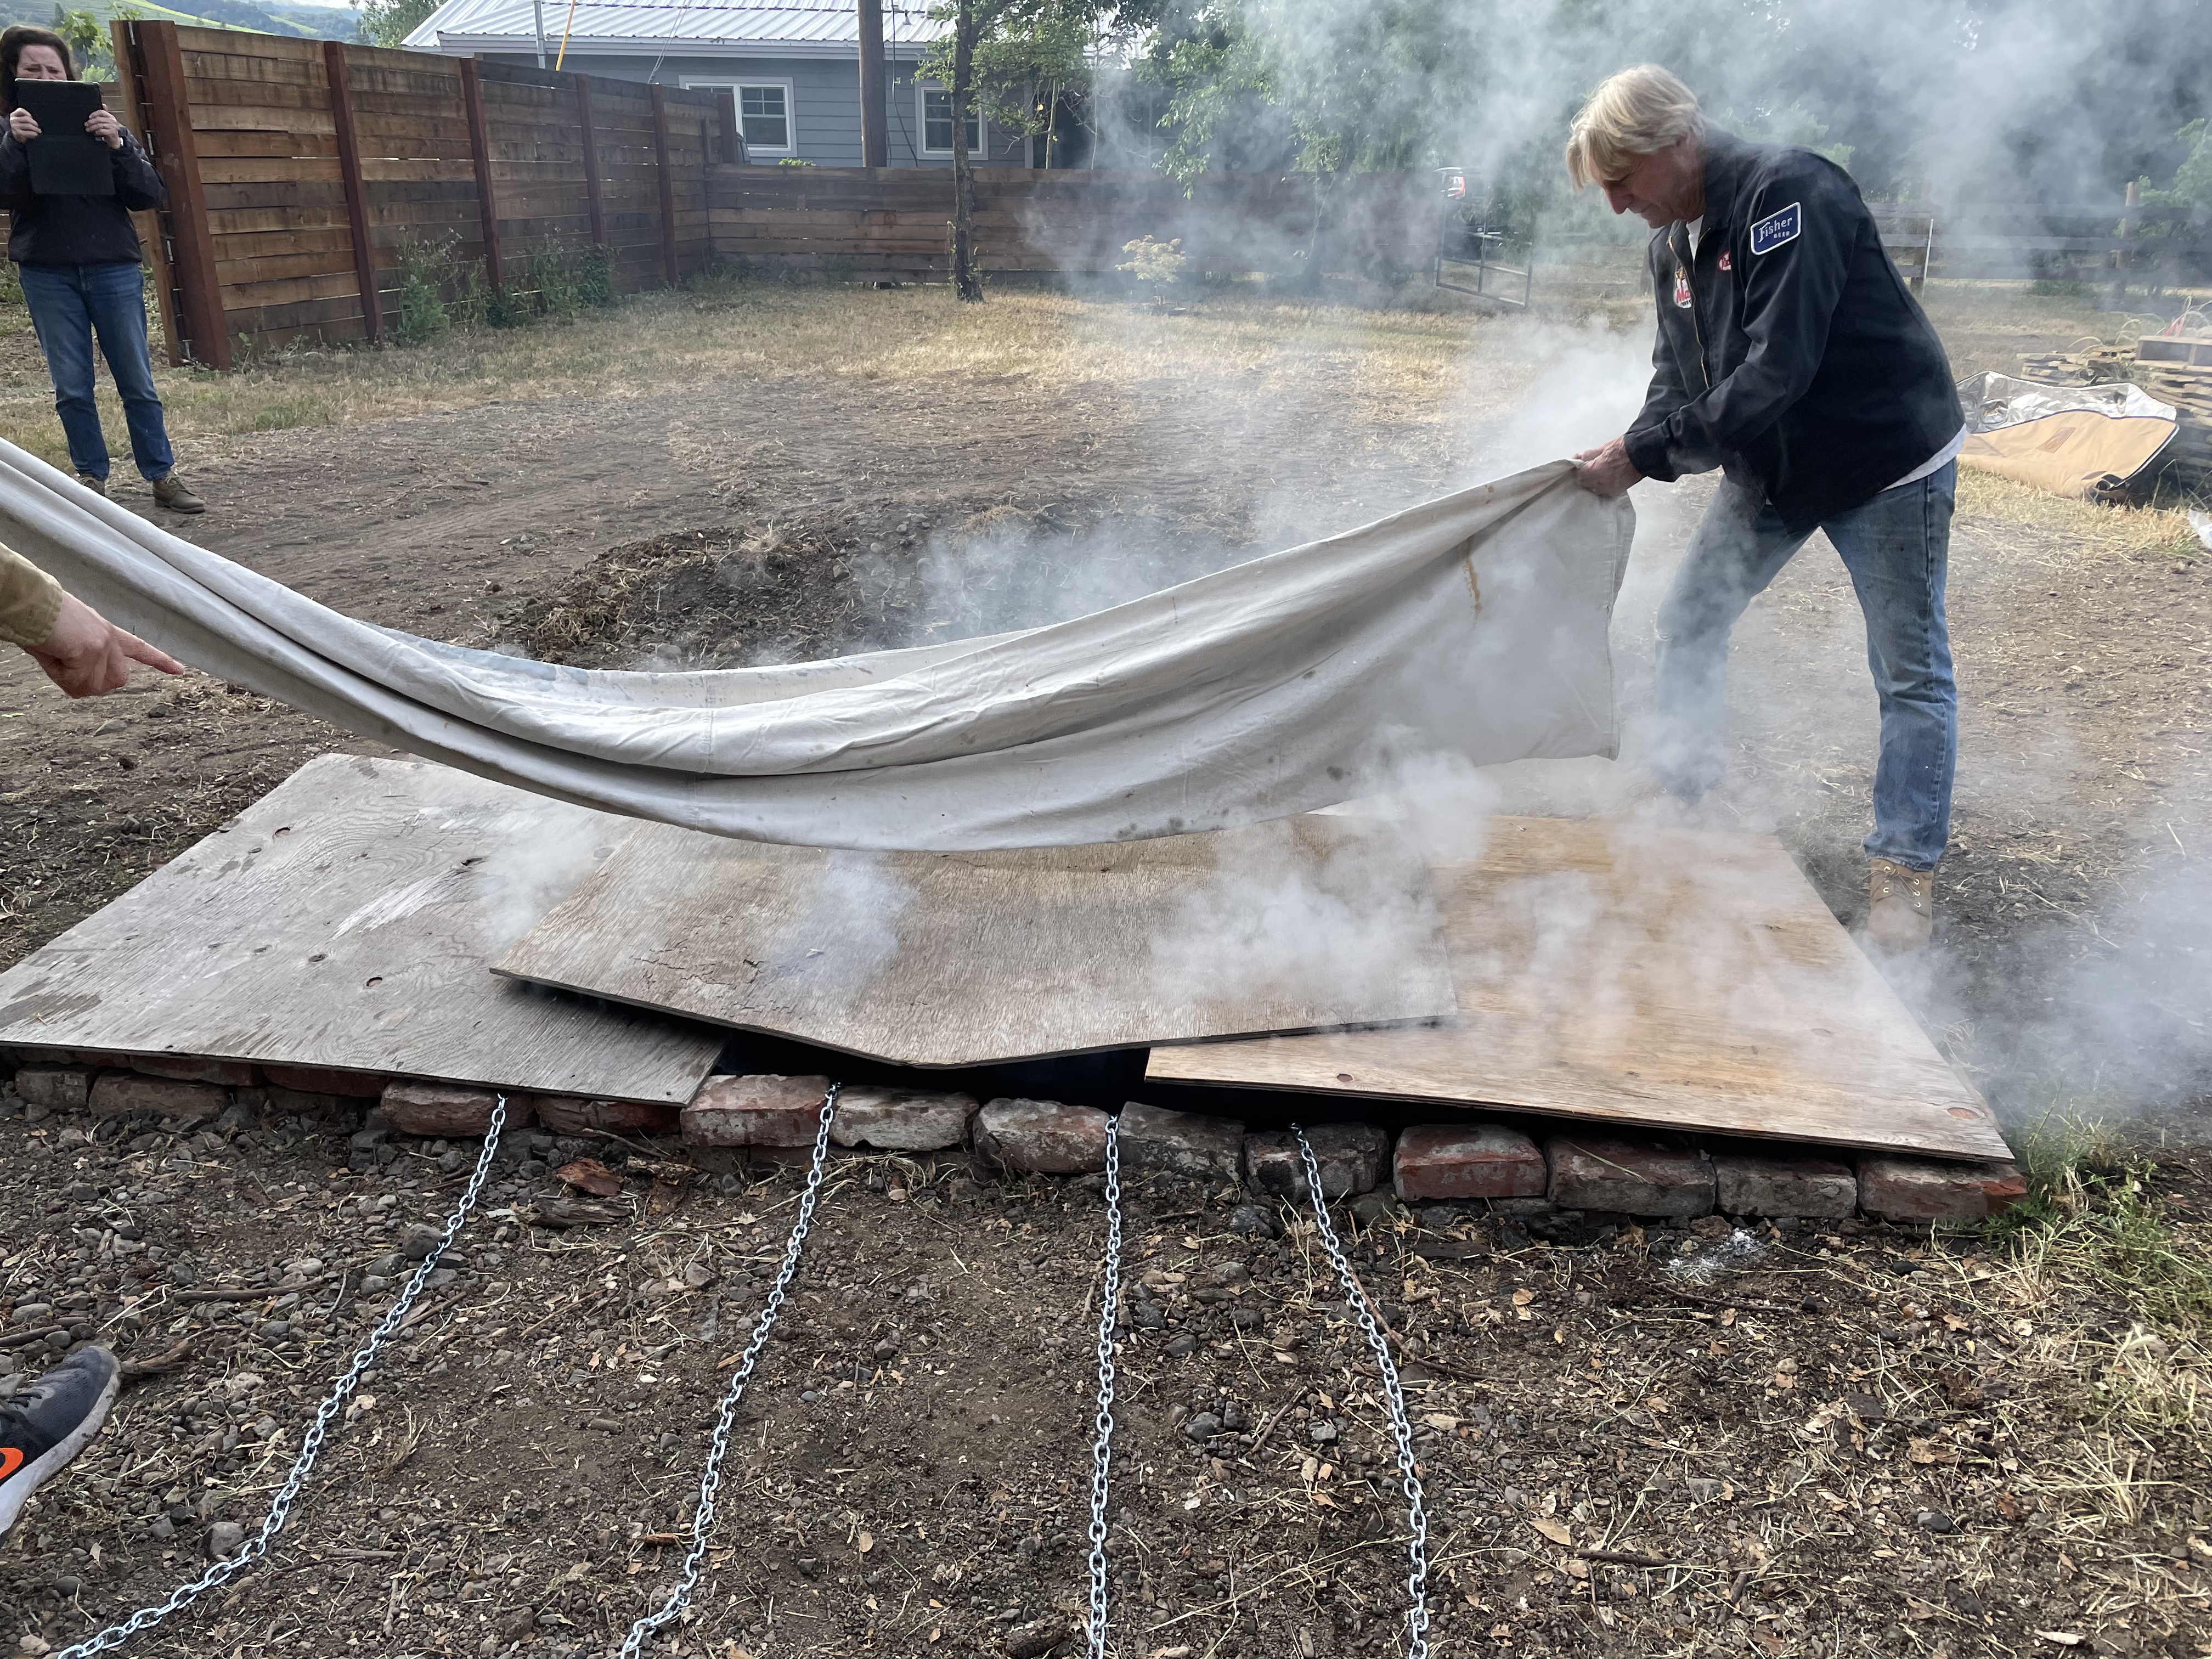 Laying canvas over the plywood lid. It&rsquo;s good to use a single piece of canvas or tarp big enough to cover the whole pit, as you can then easily fold it back and move all the soil off in a single action afterwards.